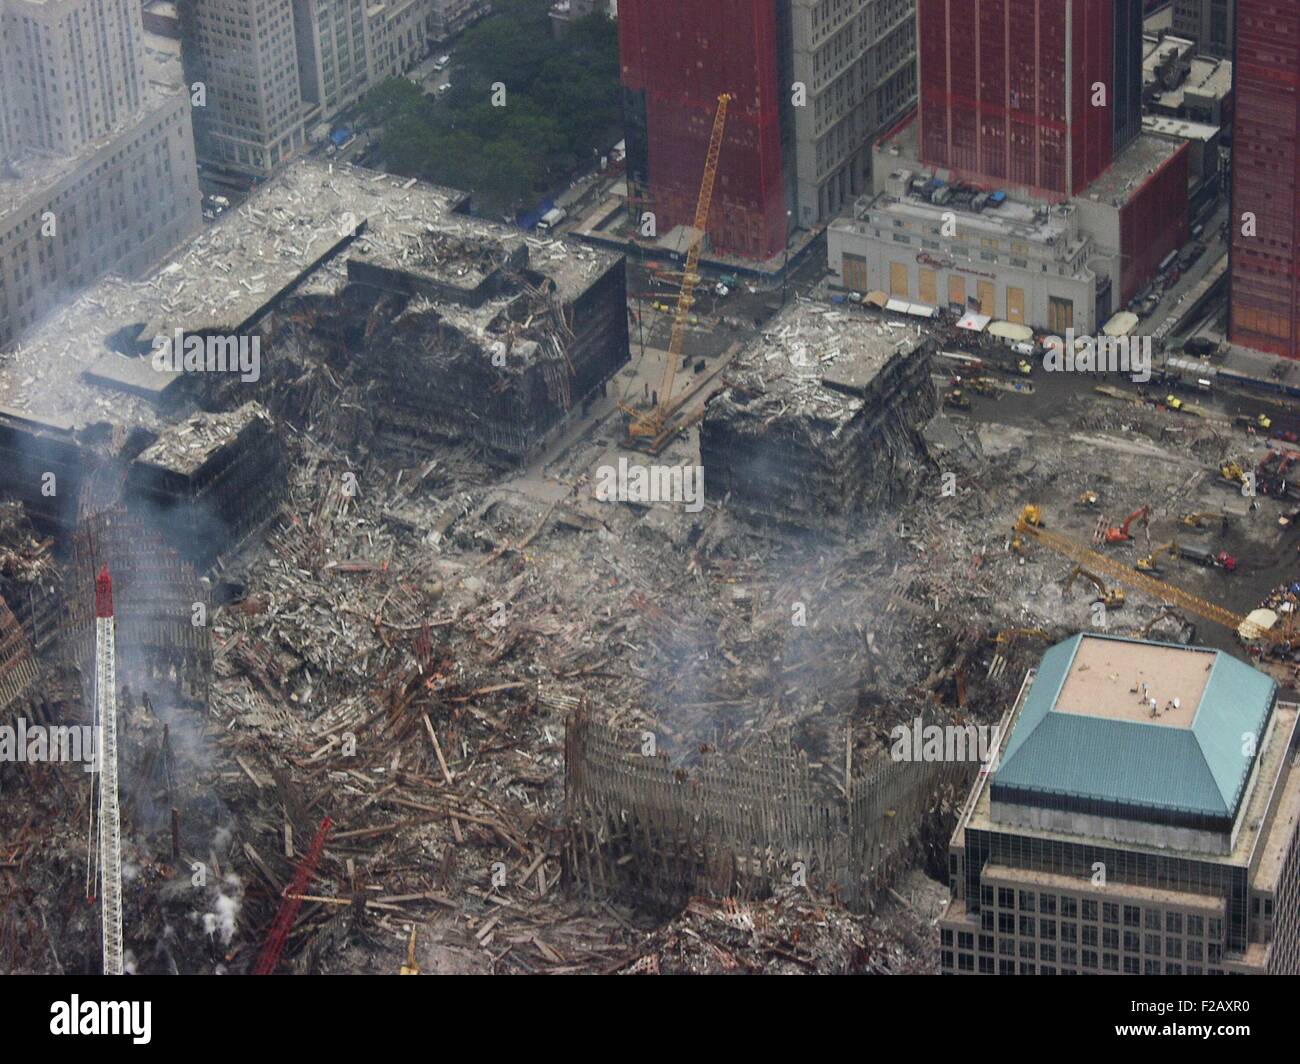 Aerial view of World Trade Center from the southwest, Sept. 27, 2001. At lower right is World Financial Center 1. World Trade Center, New York City, after September 11, 2001 terrorist attacks. (BSLOC 2015 2 105) Stock Photo